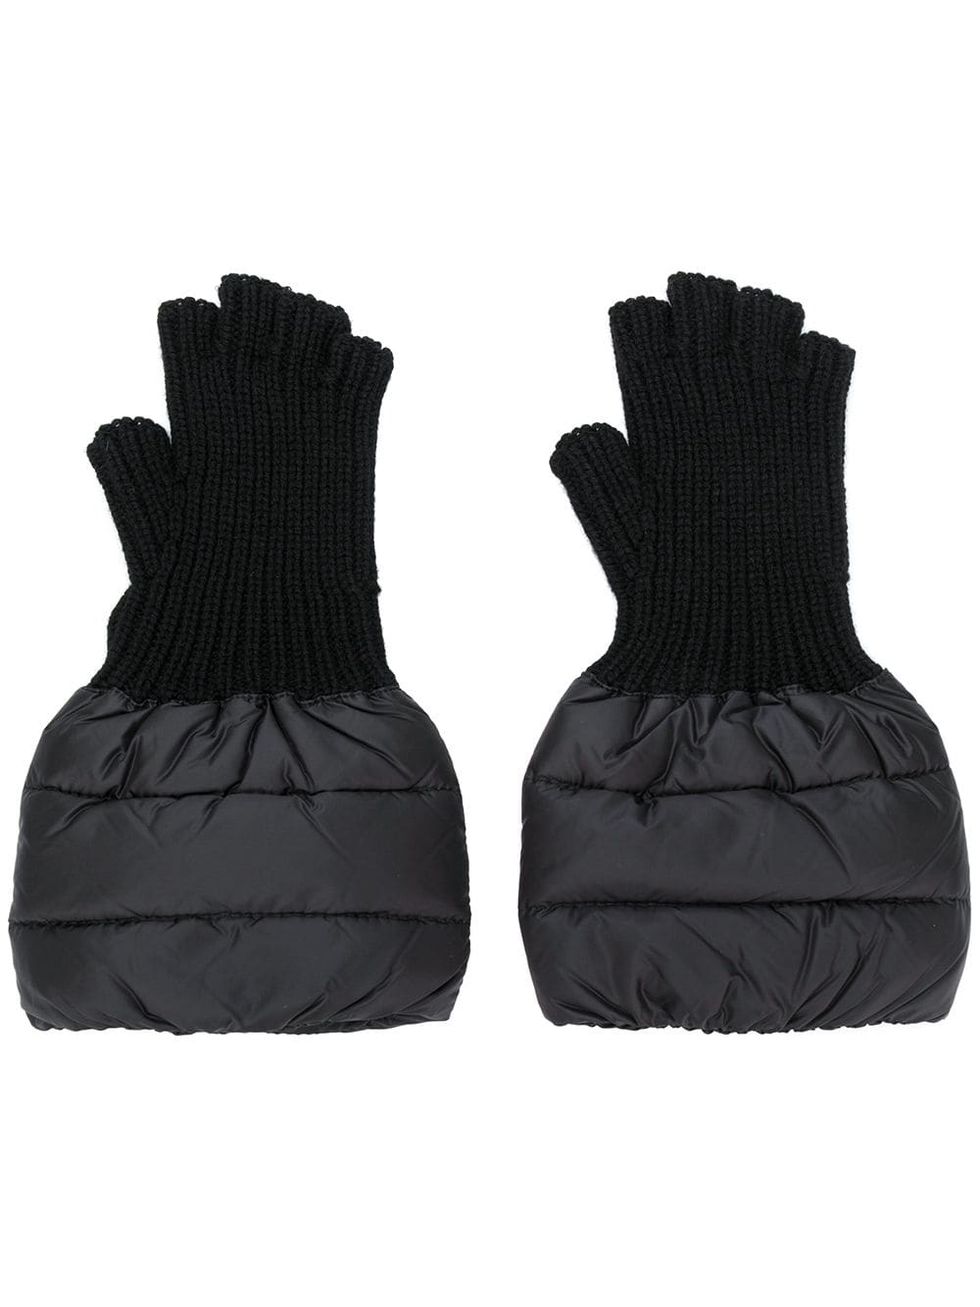 Black, Personal protective equipment, Footwear, Outerwear, Fashion accessory, Glove, 